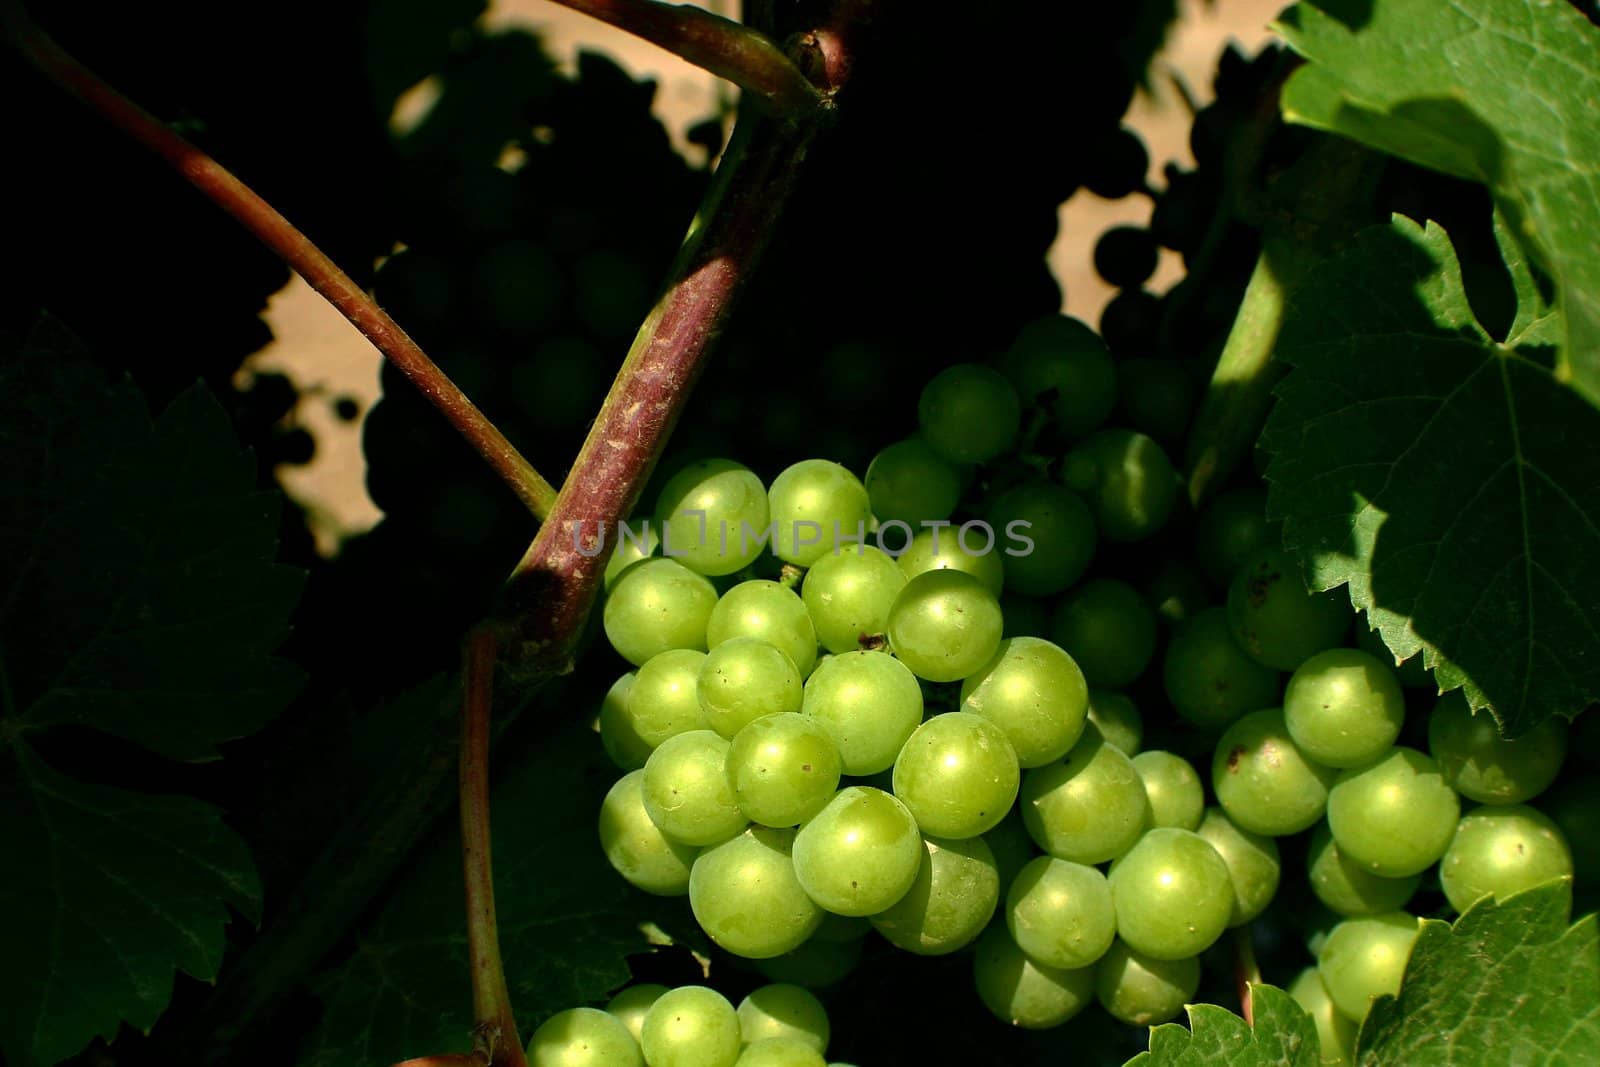 Wine making grapes hanging on a vine branch